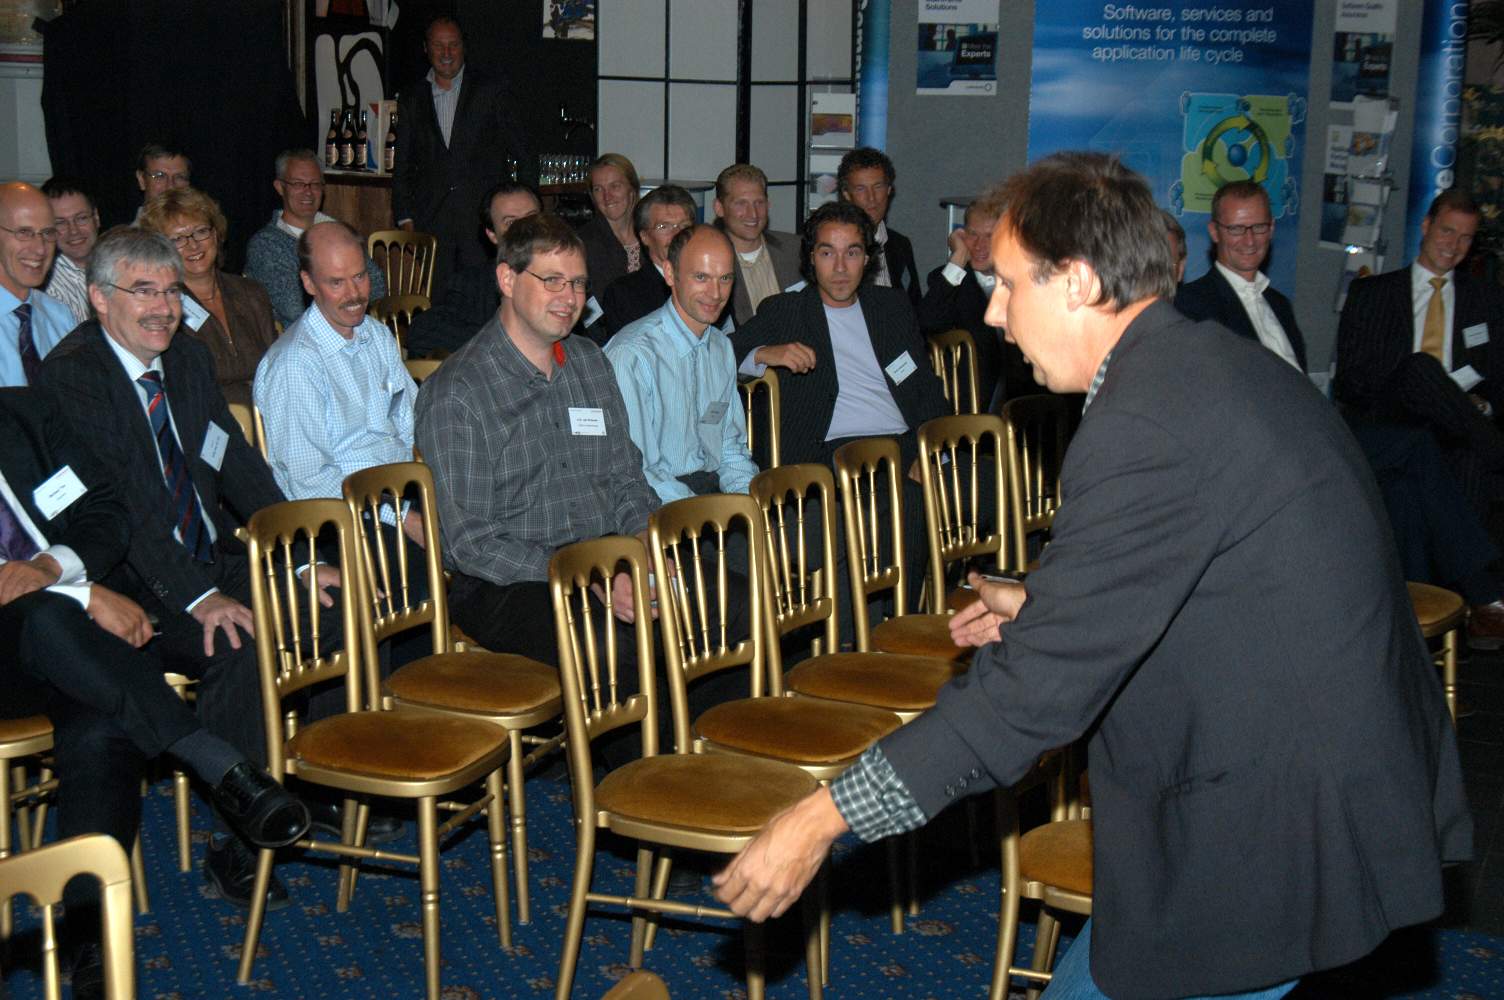 Compuware Customer Technology Briefing / Face 2 Face16 september 2004 - Orangerie Den BoschFoto door Erik van Roon
[#Beginning of Shooting Data Section]Nikon D100 
Focal Length: 38mm
White Balance: Auto
Color Mode: Mode I (sRGB)
2004/09/16 15:50:58.9
Exposure Mode: Aperture Priority
AF Mode: AF-S
Hue Adjustment: 0°
JPEG (8-bit) Fine
Metering Mode: Center-Weighted
Tone Comp: Auto
Sharpening: Auto
Image Size:  Large (3008 x 2000)
1/60 sec - f/6.3
Flash Sync Mode: Front Curtain
Noise Reduction: OFF
Exposure Comp.: 0 EV
Auto Flash Mode: D-TTL
Image Comment:                                     
[#End of Shooting Data Section]